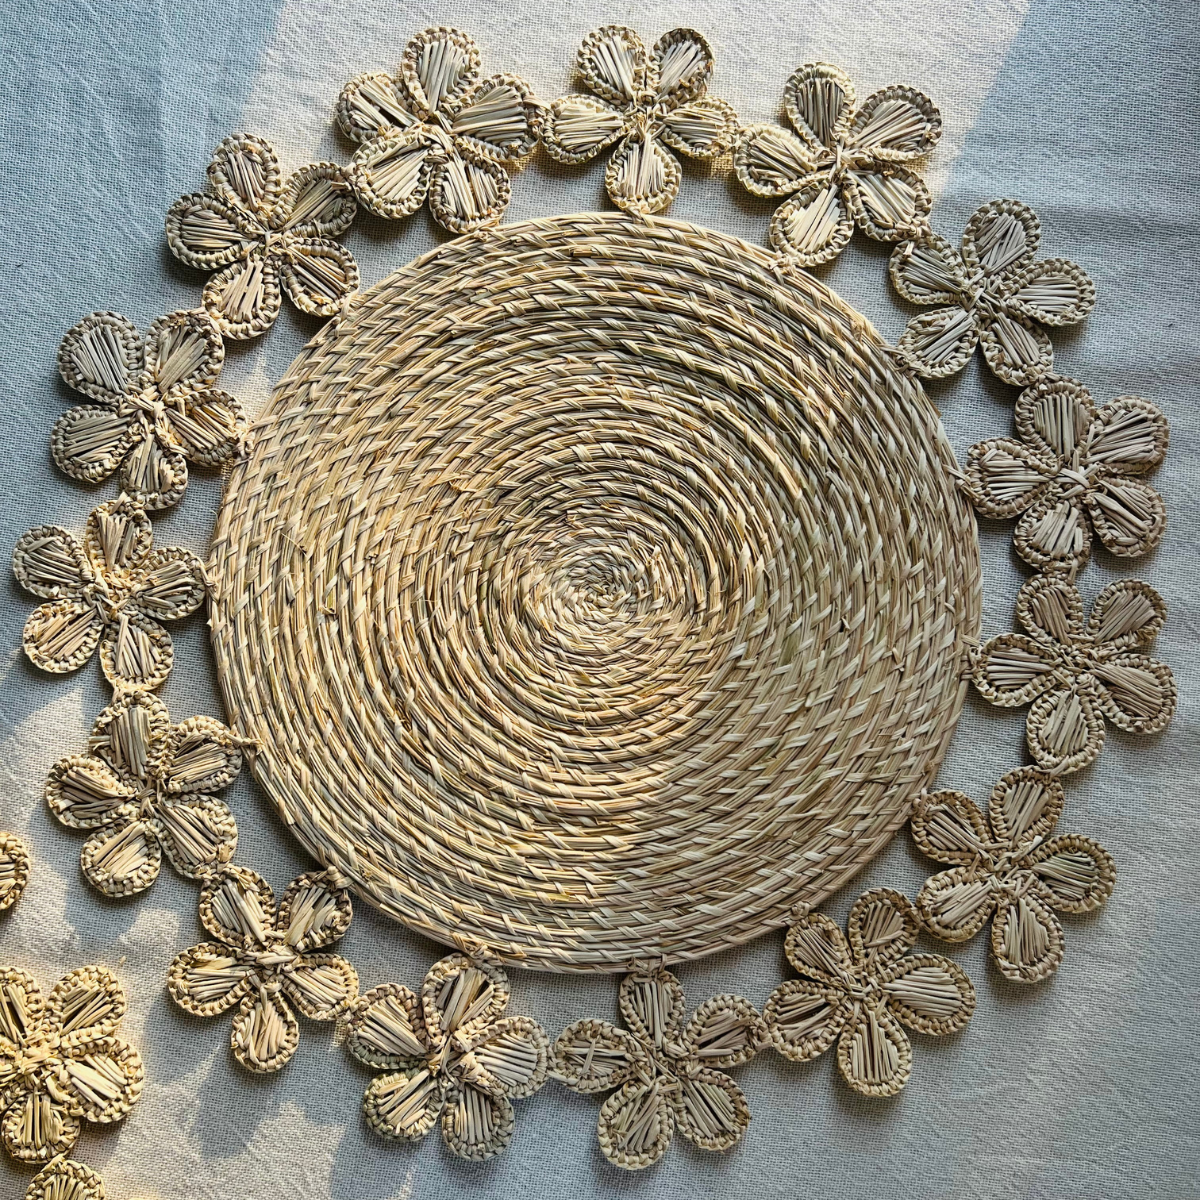 Handwoven Flower Placemat